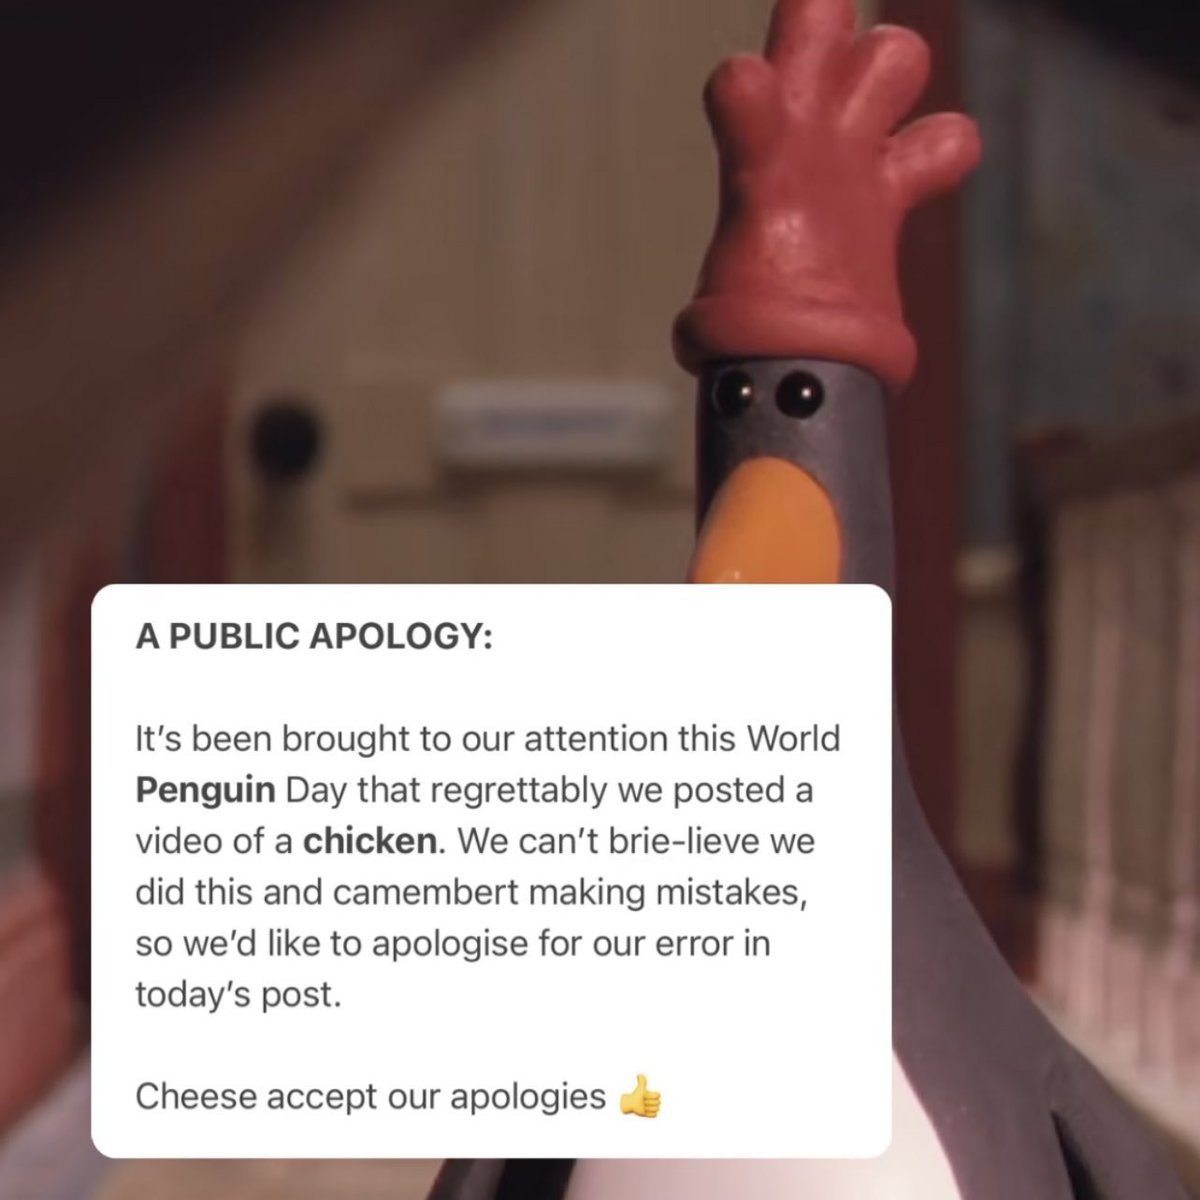 Aardman has issued an apology after posting a photo of a chicken on World Penguin Day. (via: @jeeveswilliams)